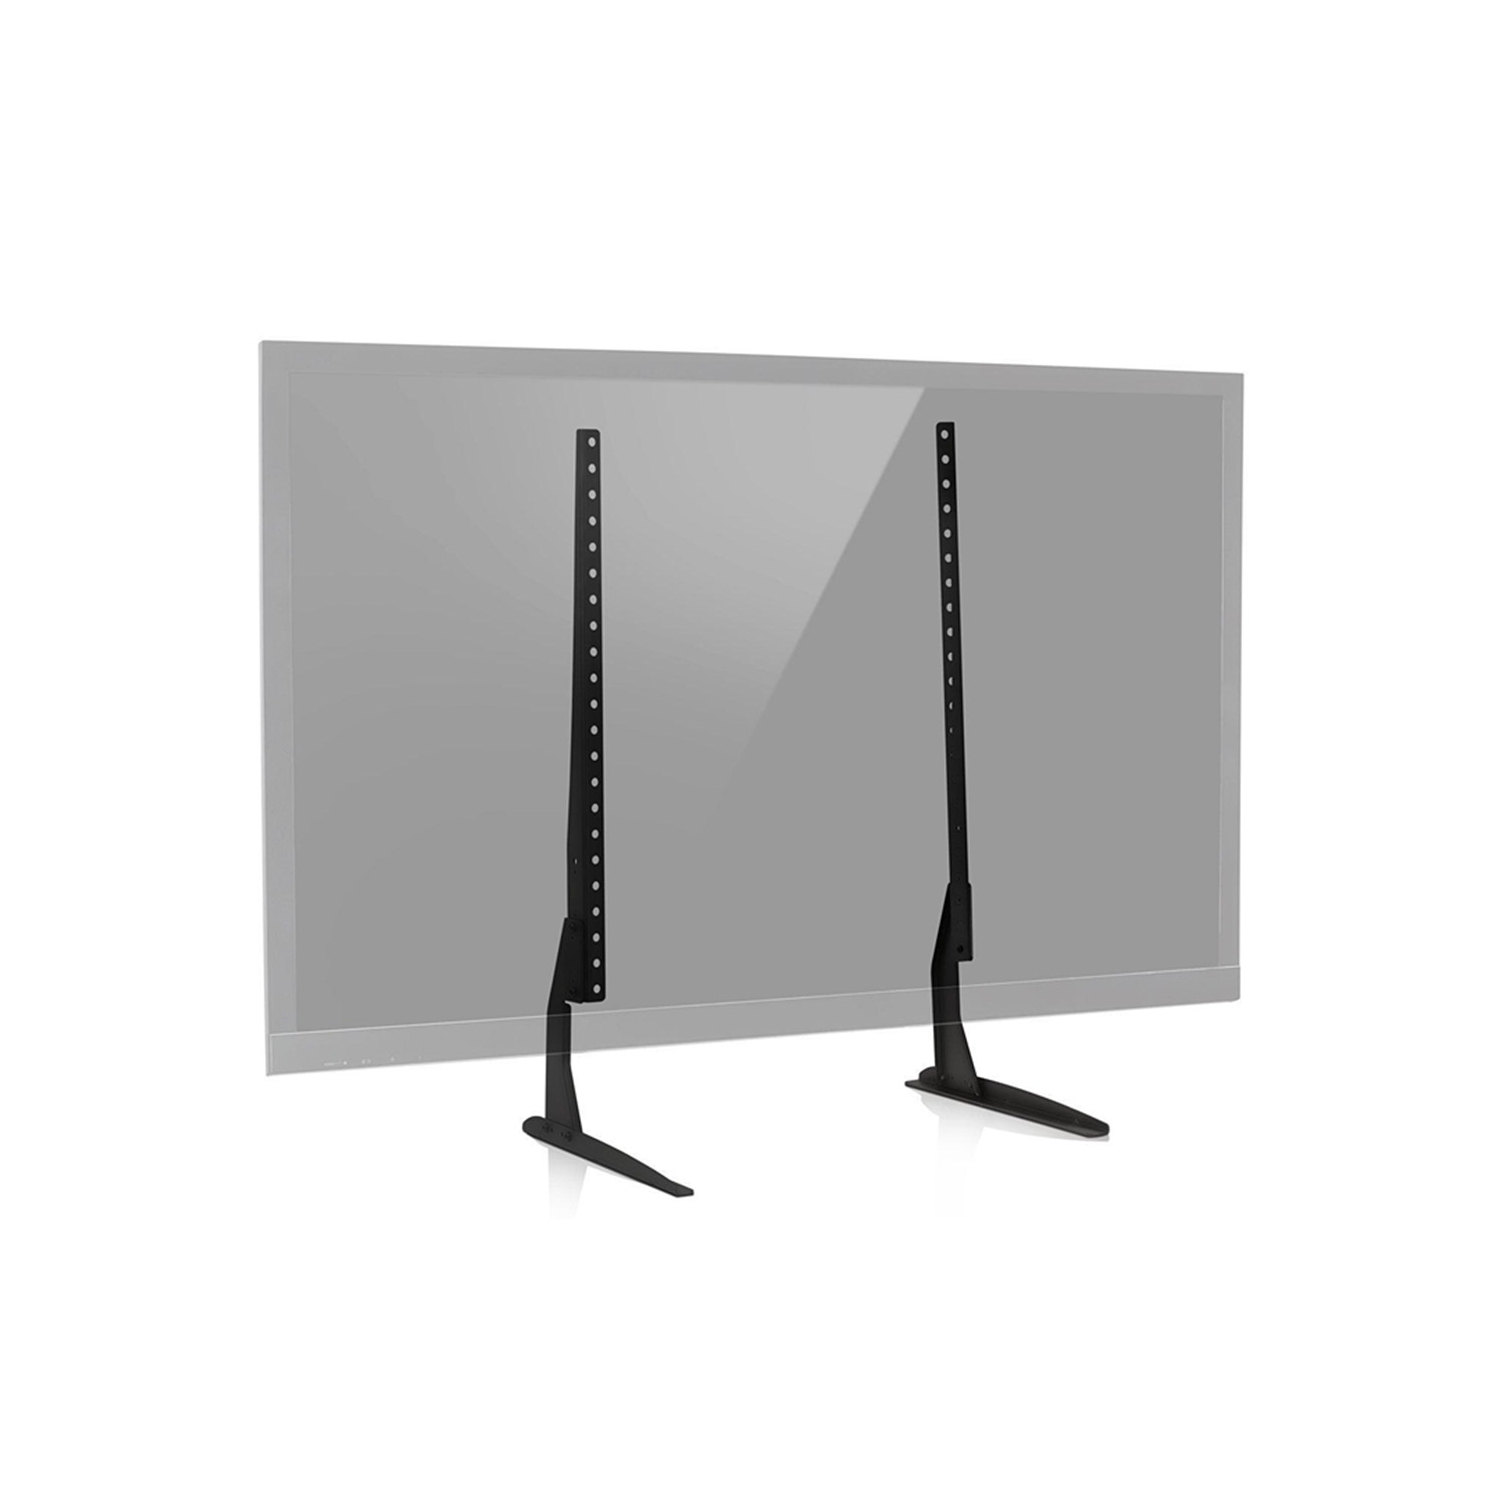 Table Top TV Stand, Universal Tabletop TV Mount Bracket Base for 37"-65" LED LCD Plasma Legs up to VESA 600 and 77 Lbs